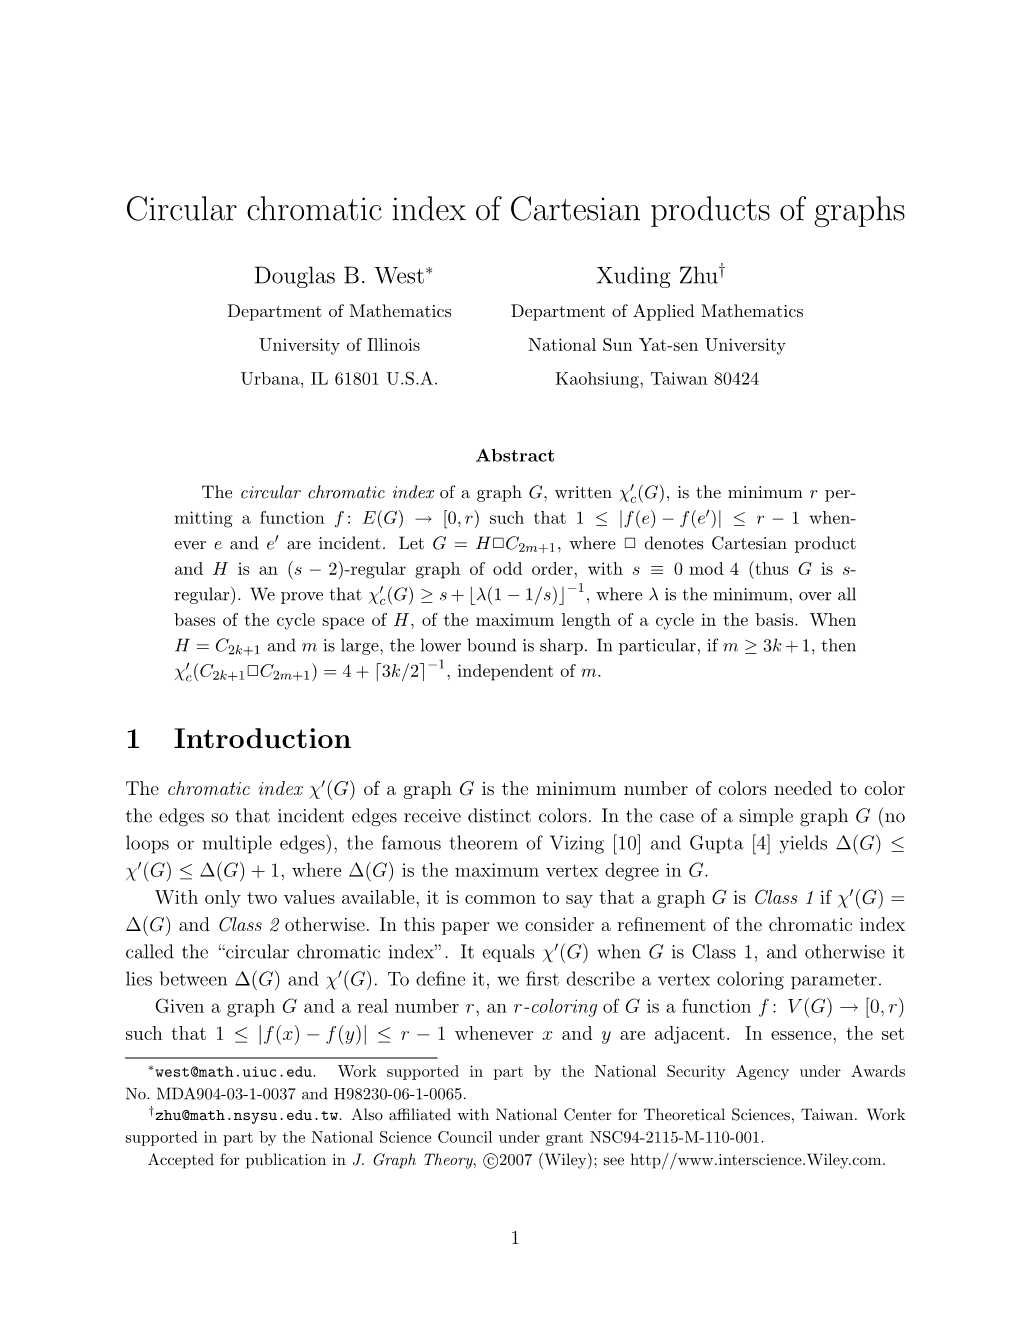 Circular Chromatic Index of Cartesian Products of Graphs